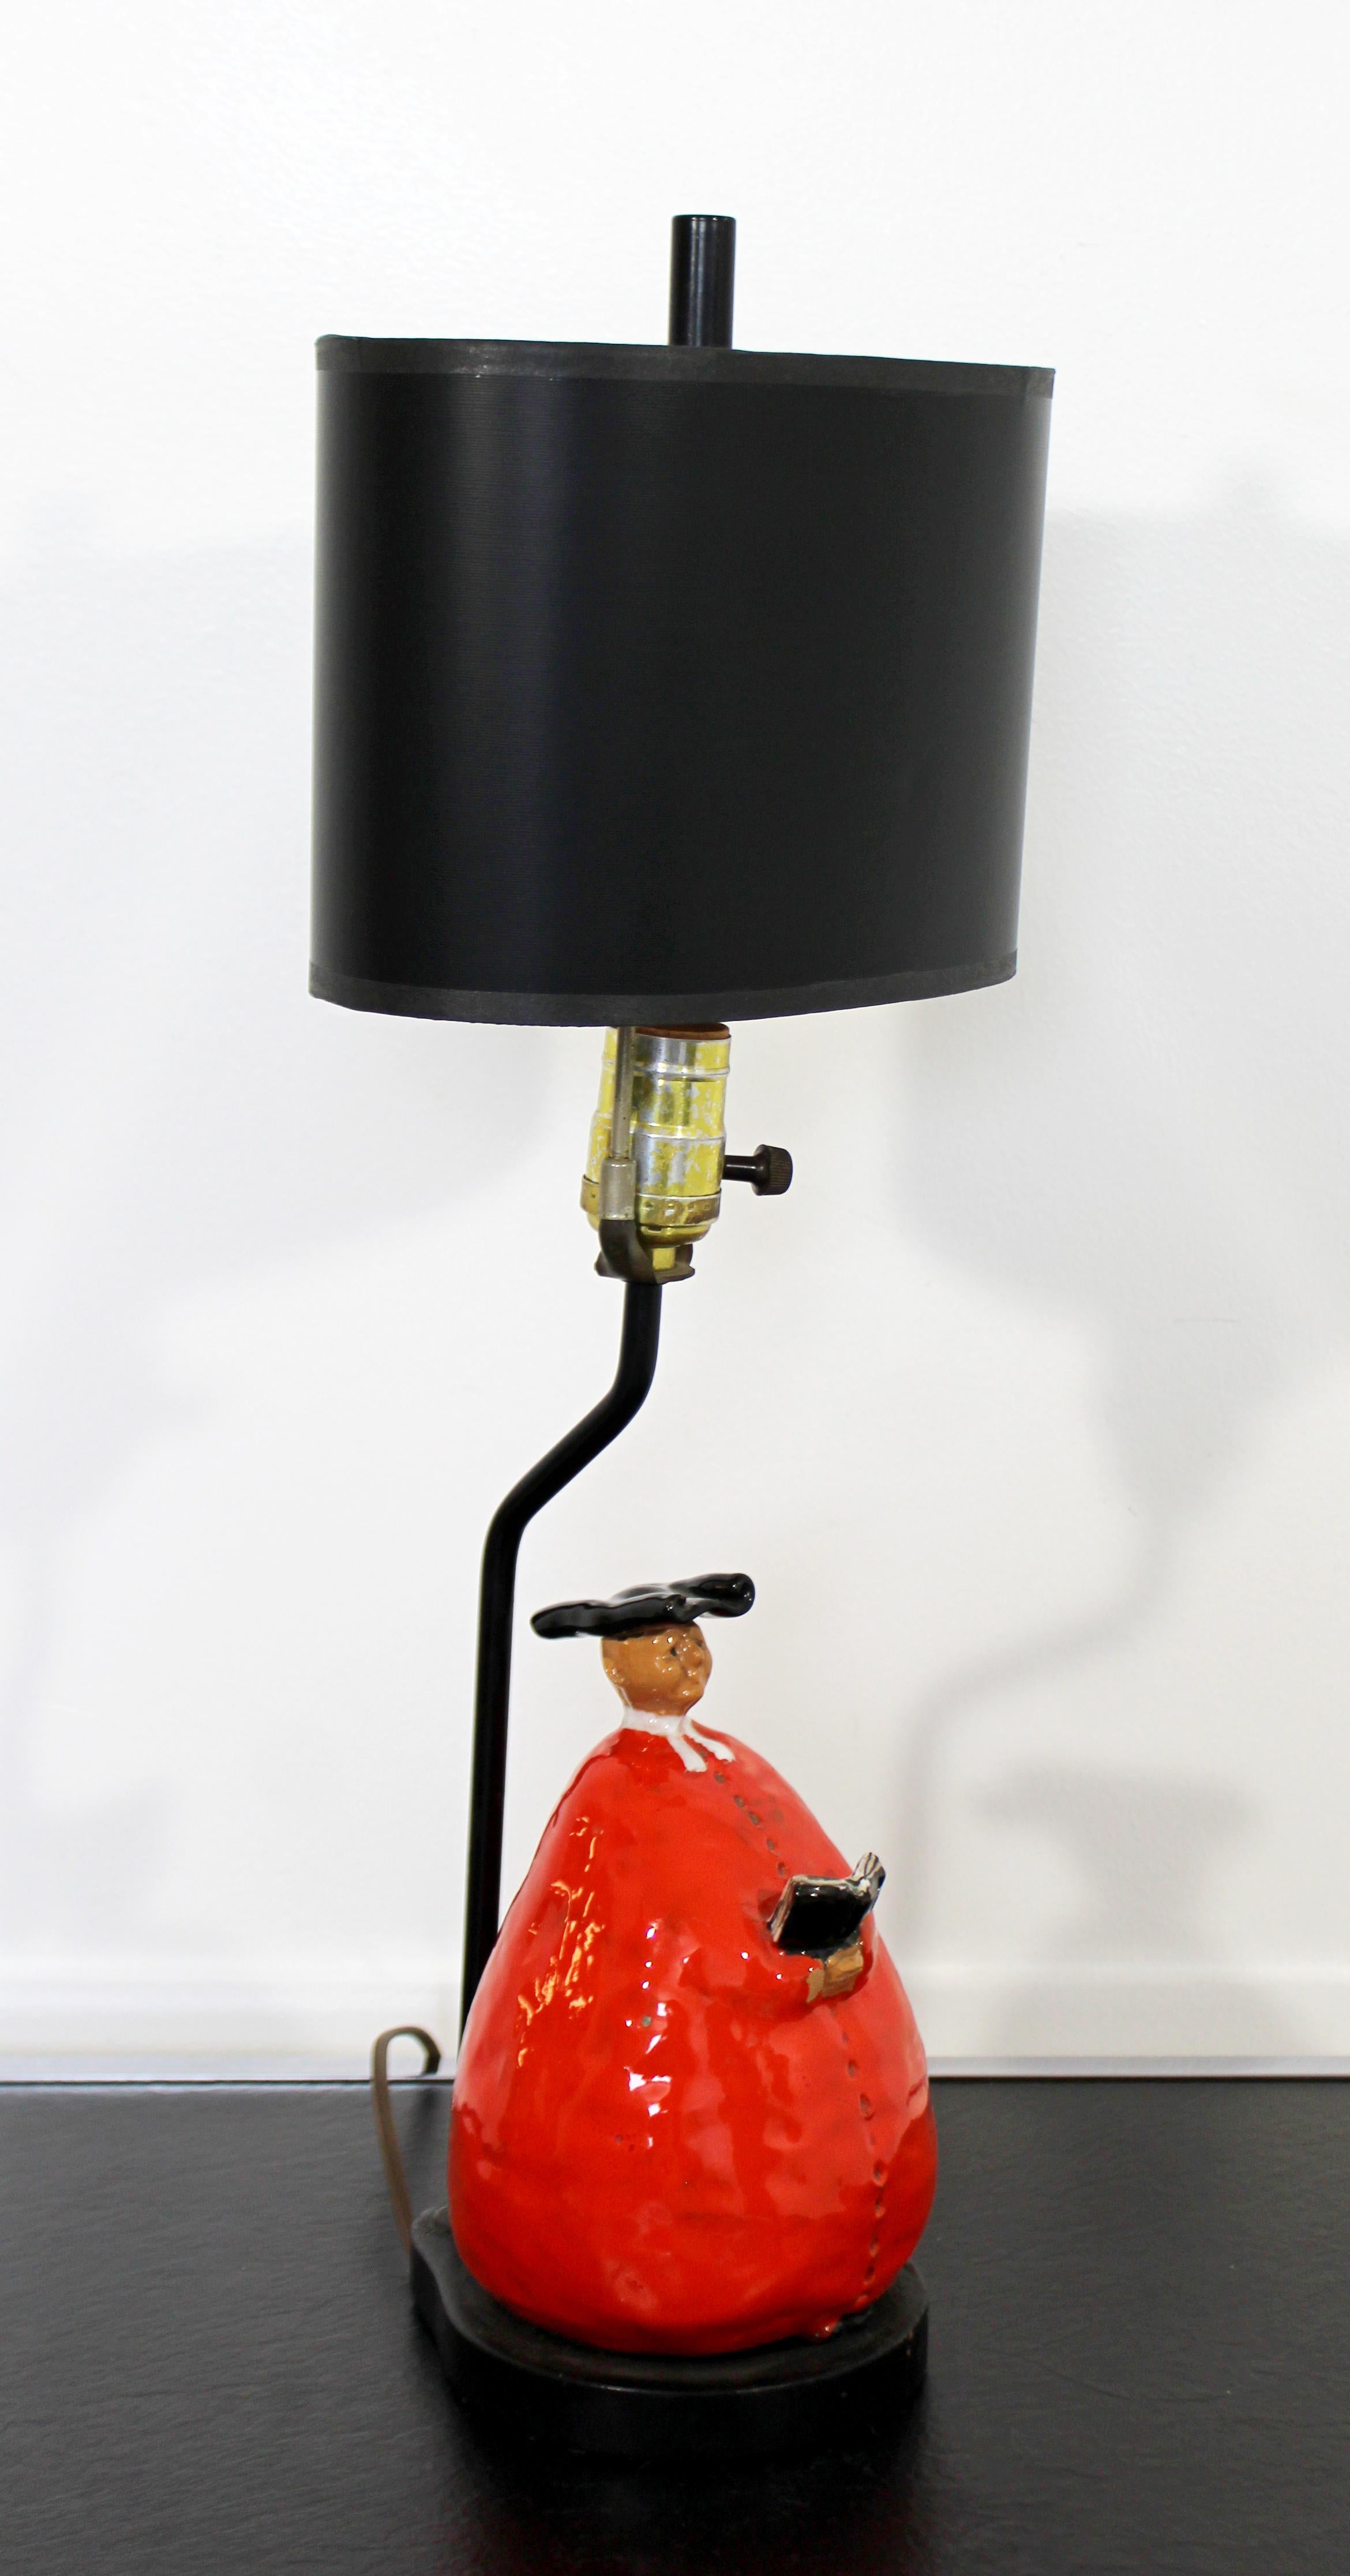 For your consideration is an amazing and rare, Italian ceramic table lamp, comprised of Abbot Monk Figurines in red, black and white glaze, circa 1950s. With wrought iron poles and wood bases. In good vintage condition. The dimensions are 8